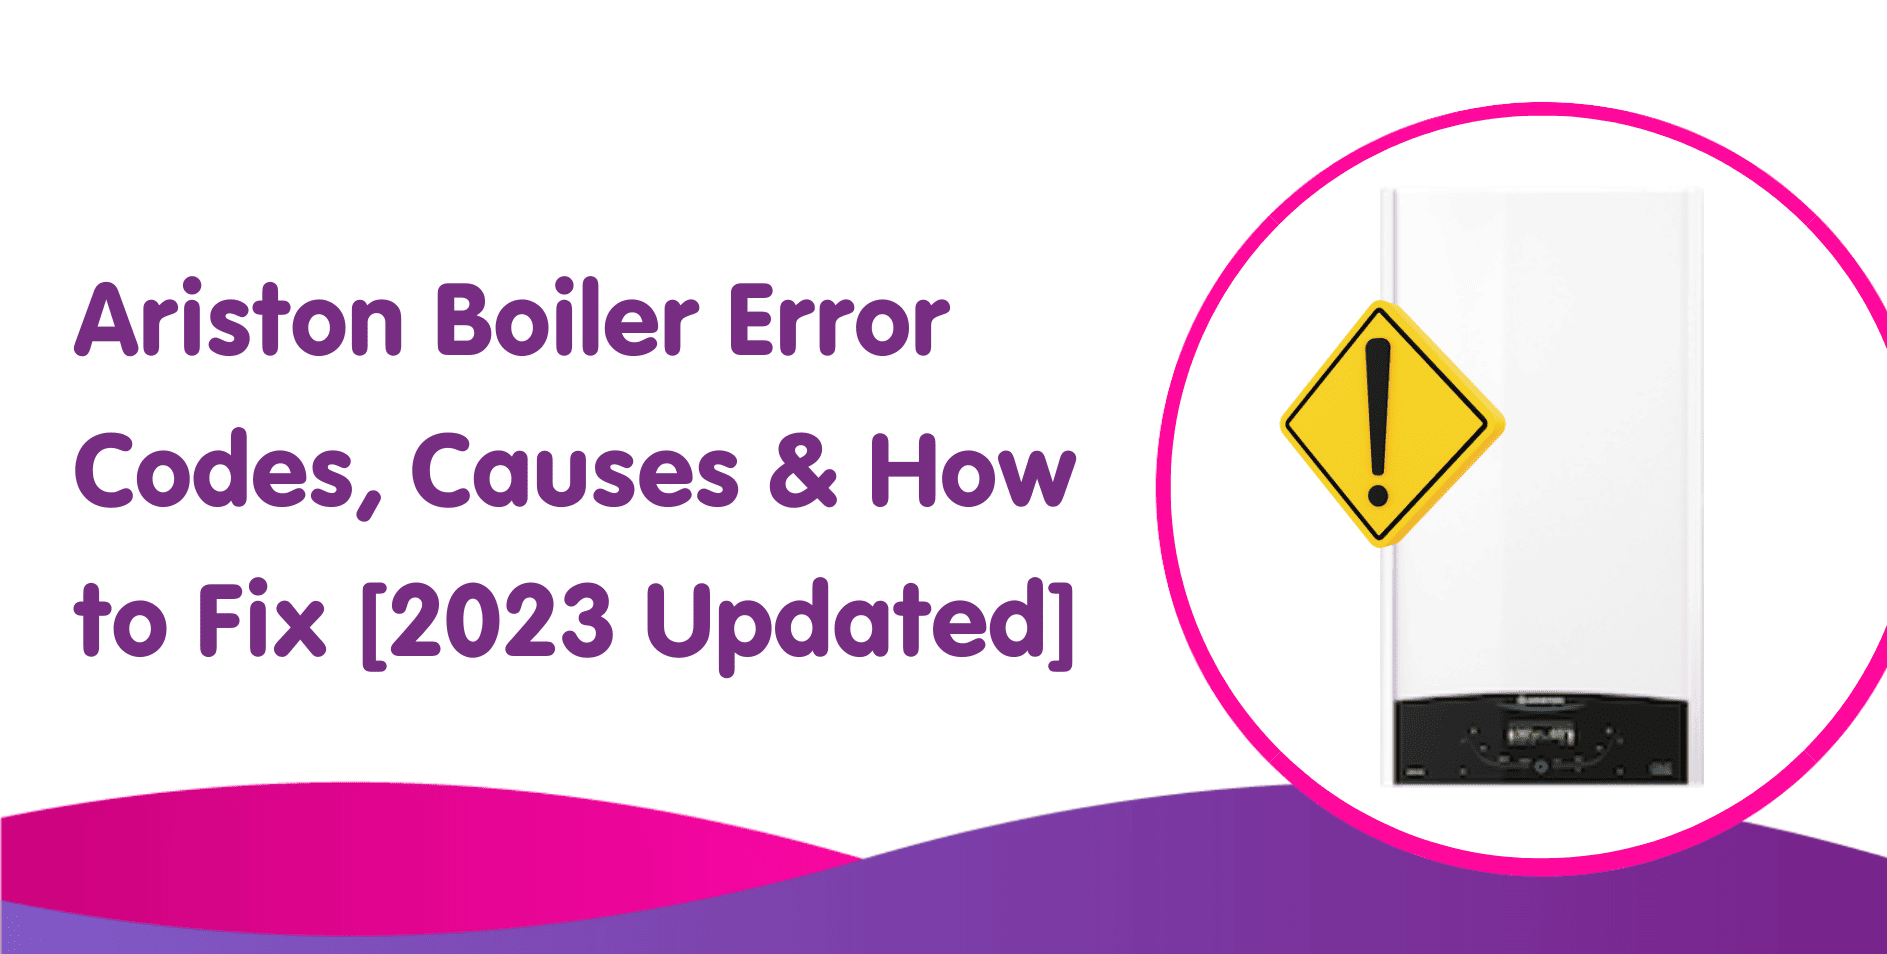 Ariston Boiler Error Codes, Causes & How to Fix [2023 Updated]